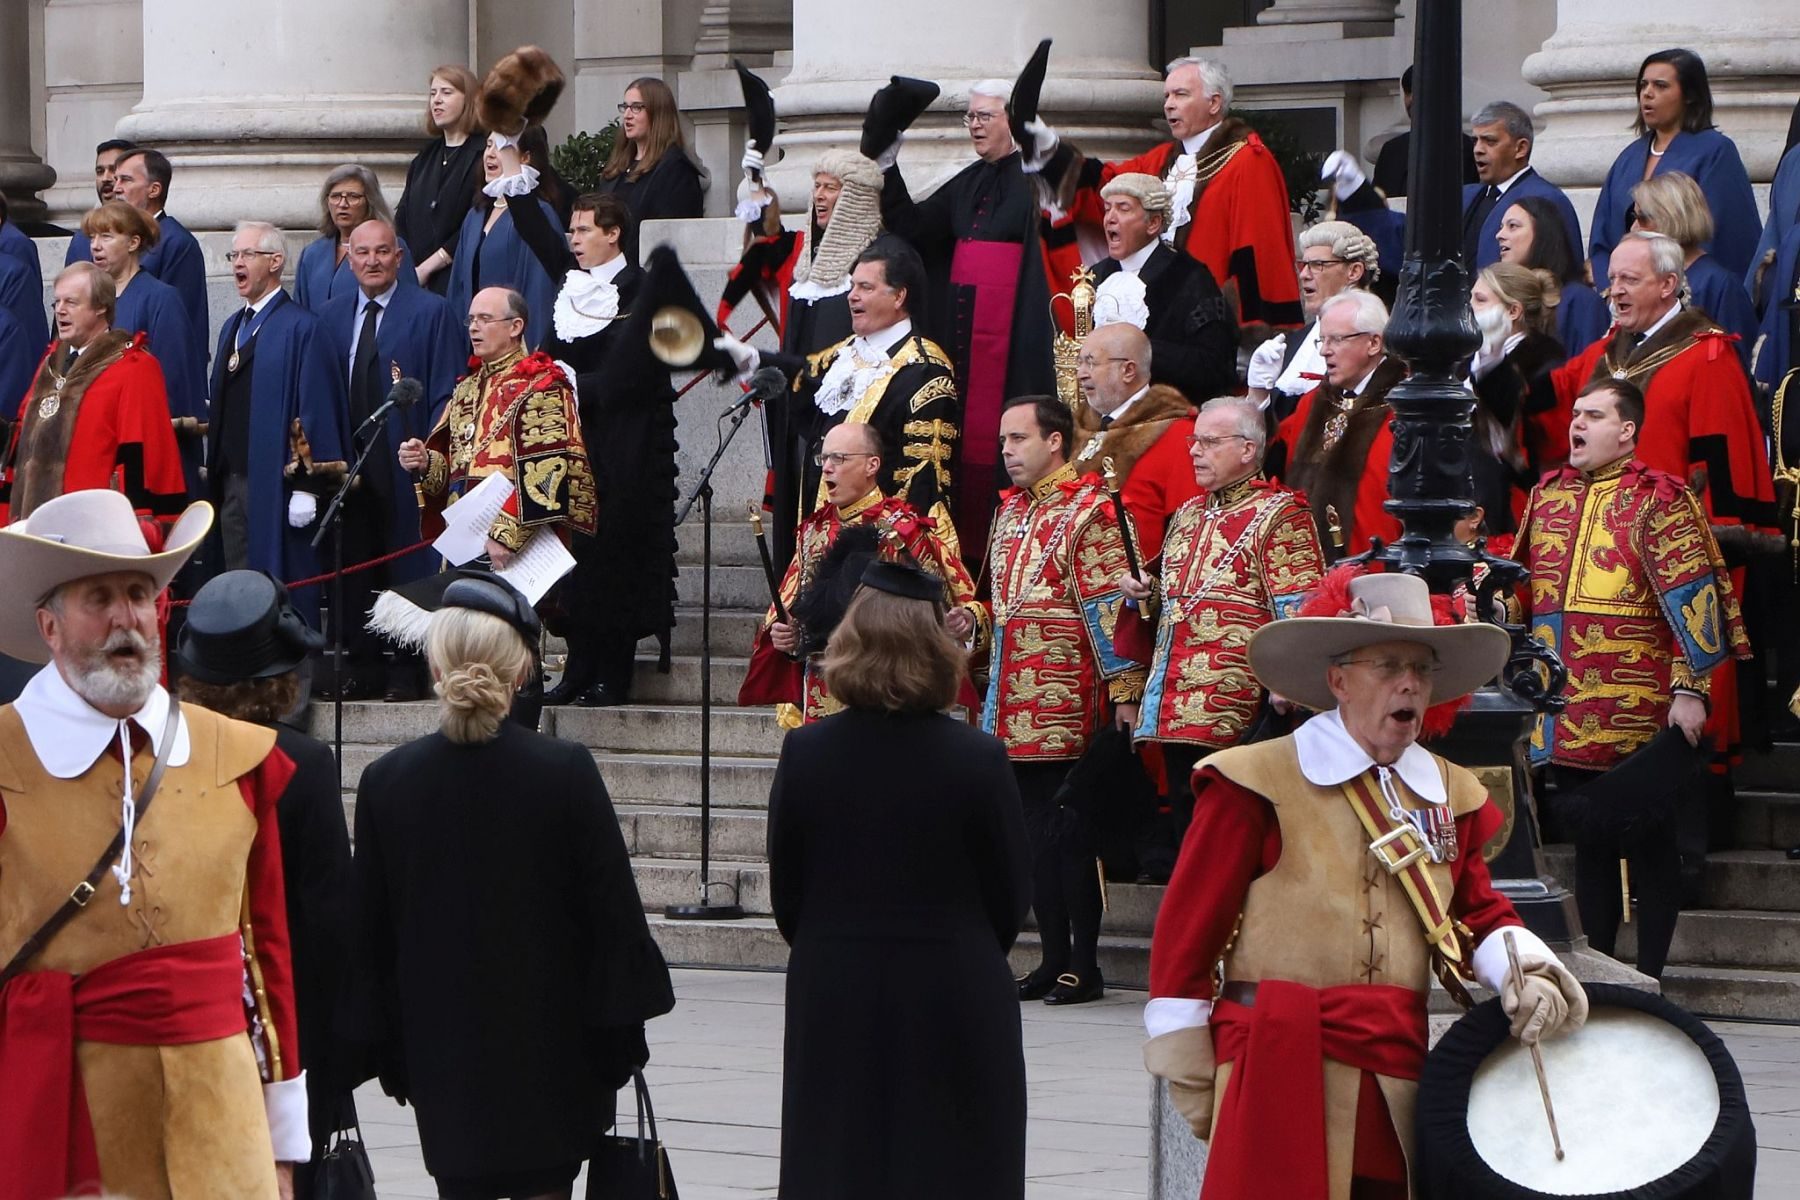 The Lord Mayor and dignitaries, including Heralds, at the reading of the Royal Proclamation of King Charles III as King, read from the steps of the Royal Exchange in the City of London.